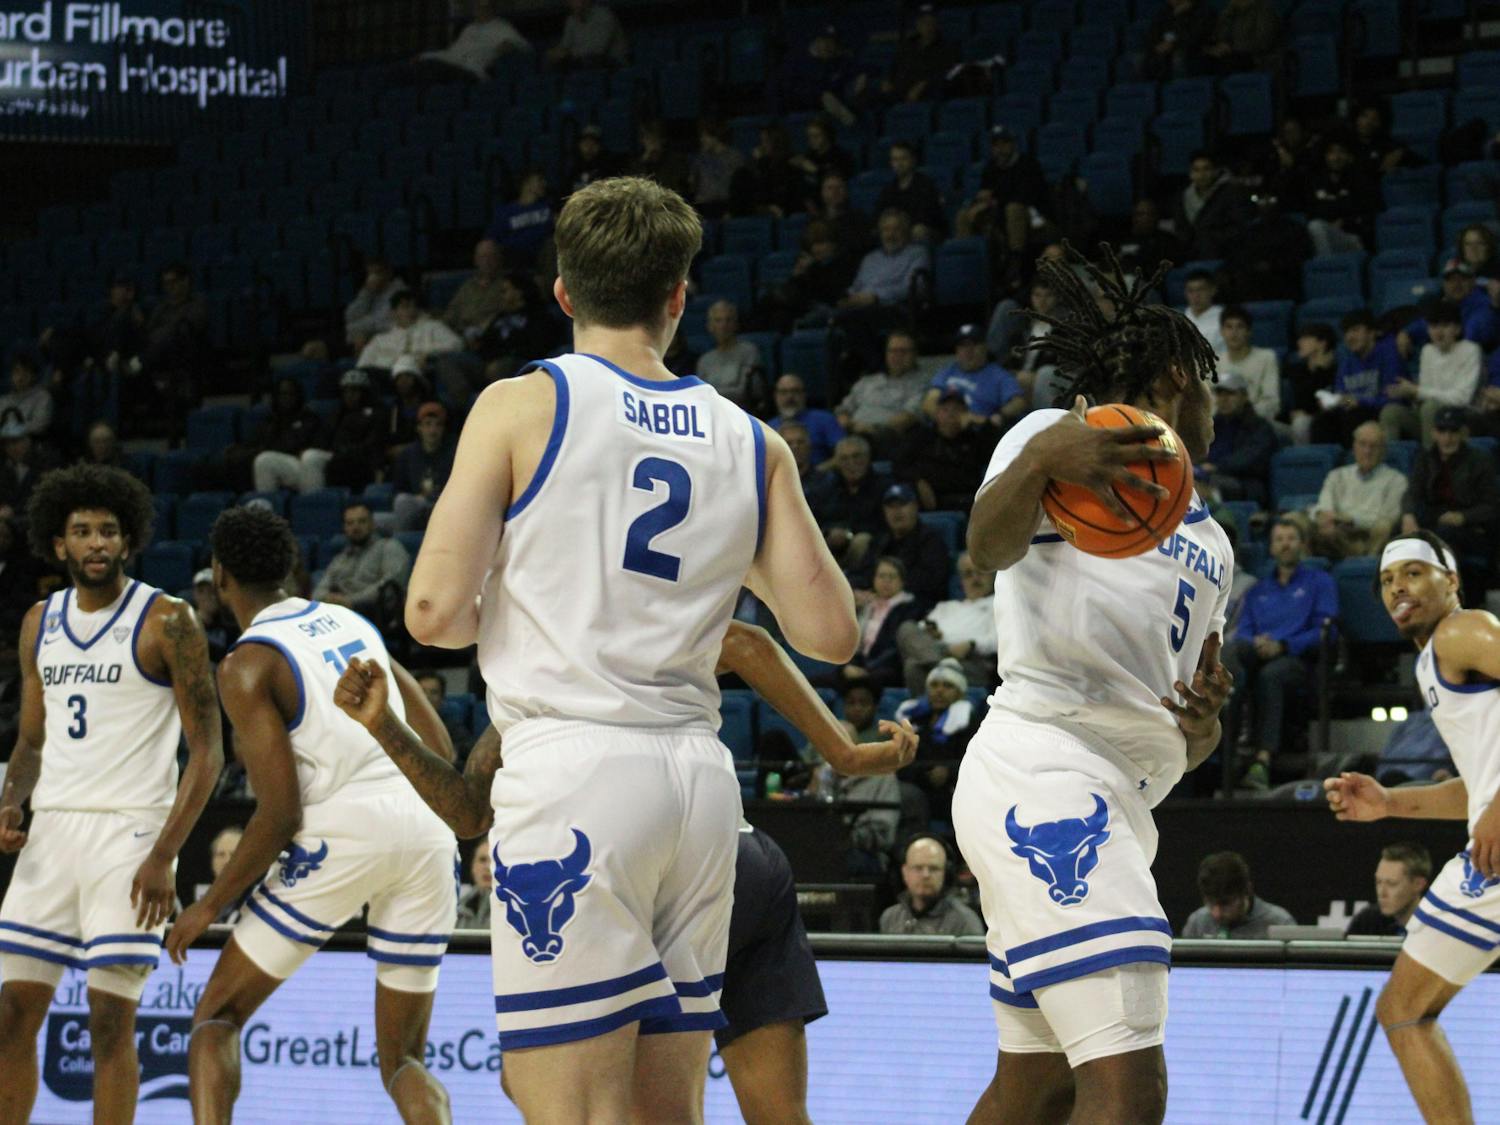 UB's Ryan Sabol scored a career-high 21 points against Bowling Green on Tuesday.